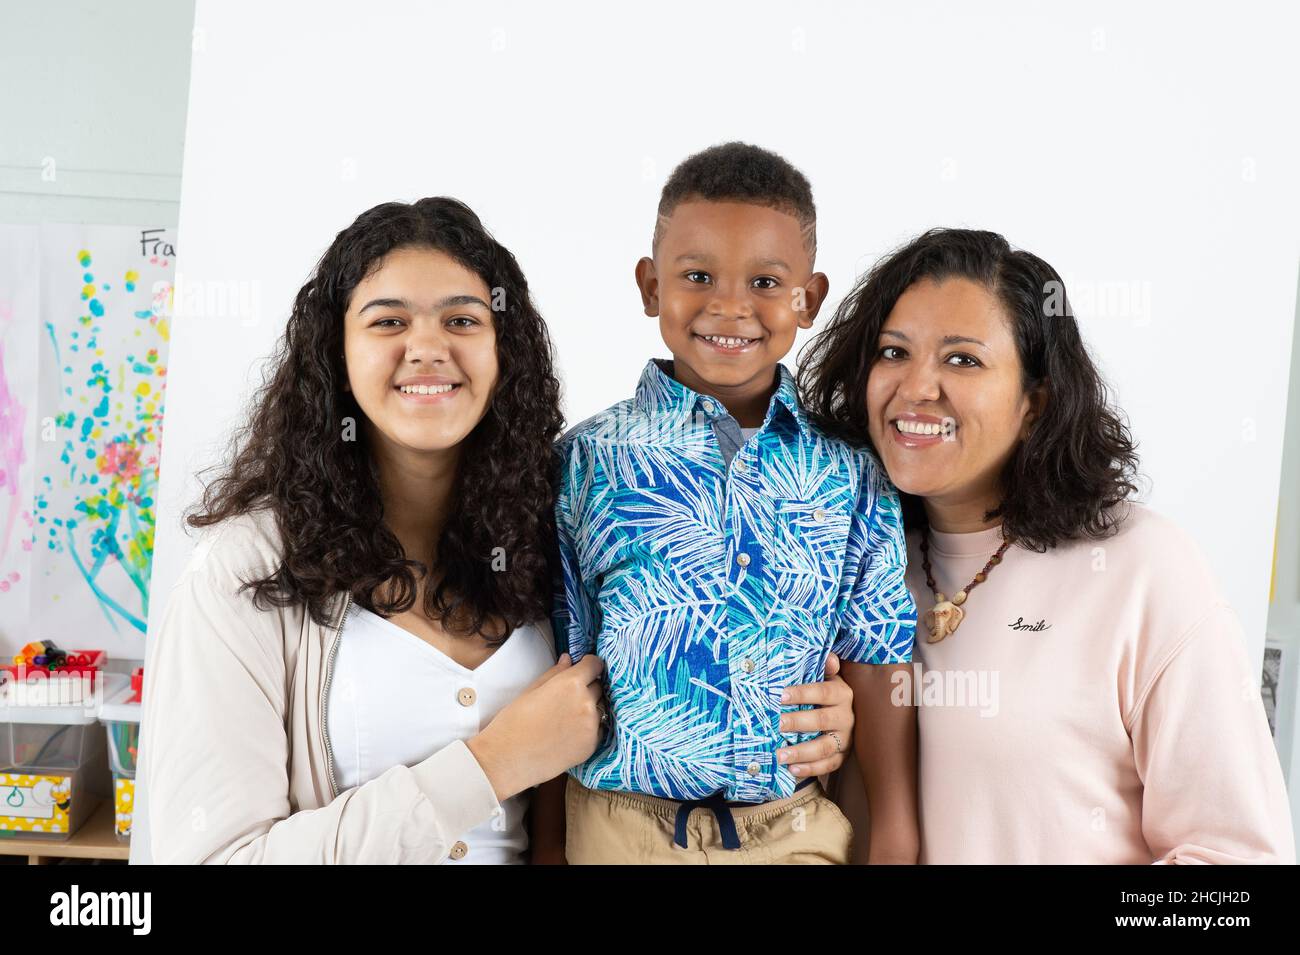 Closeup portrait of 5 year old boy, smiling, white background, with mother and 13 year old sister Stock Photo